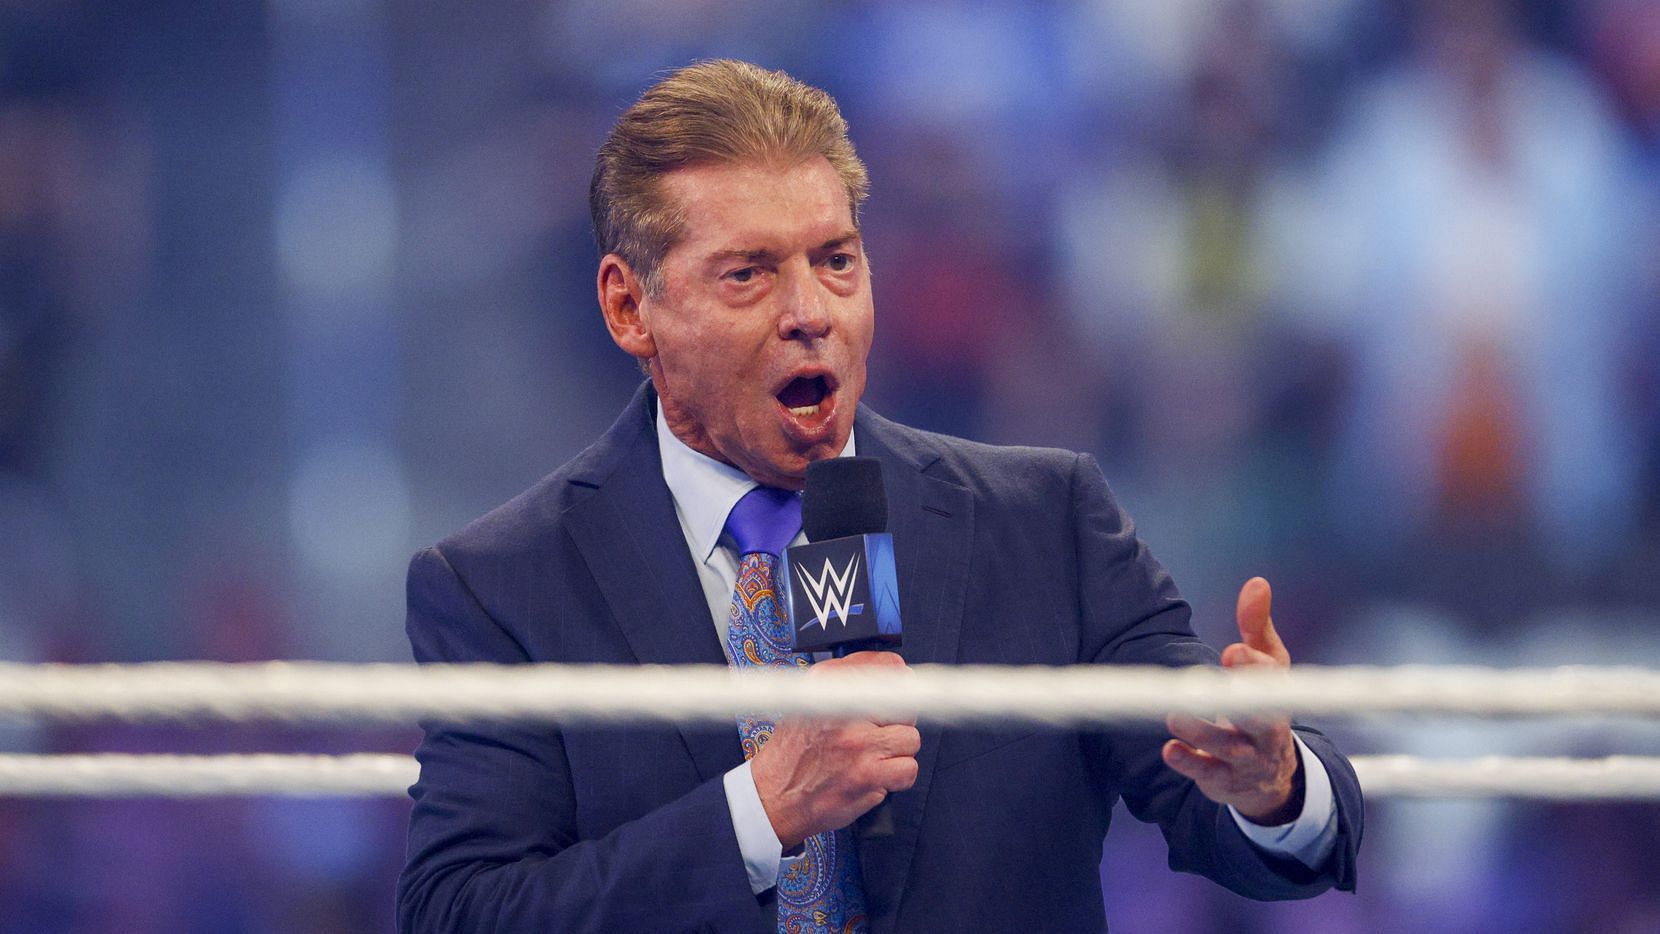 Vince McMahon has several unusual rules